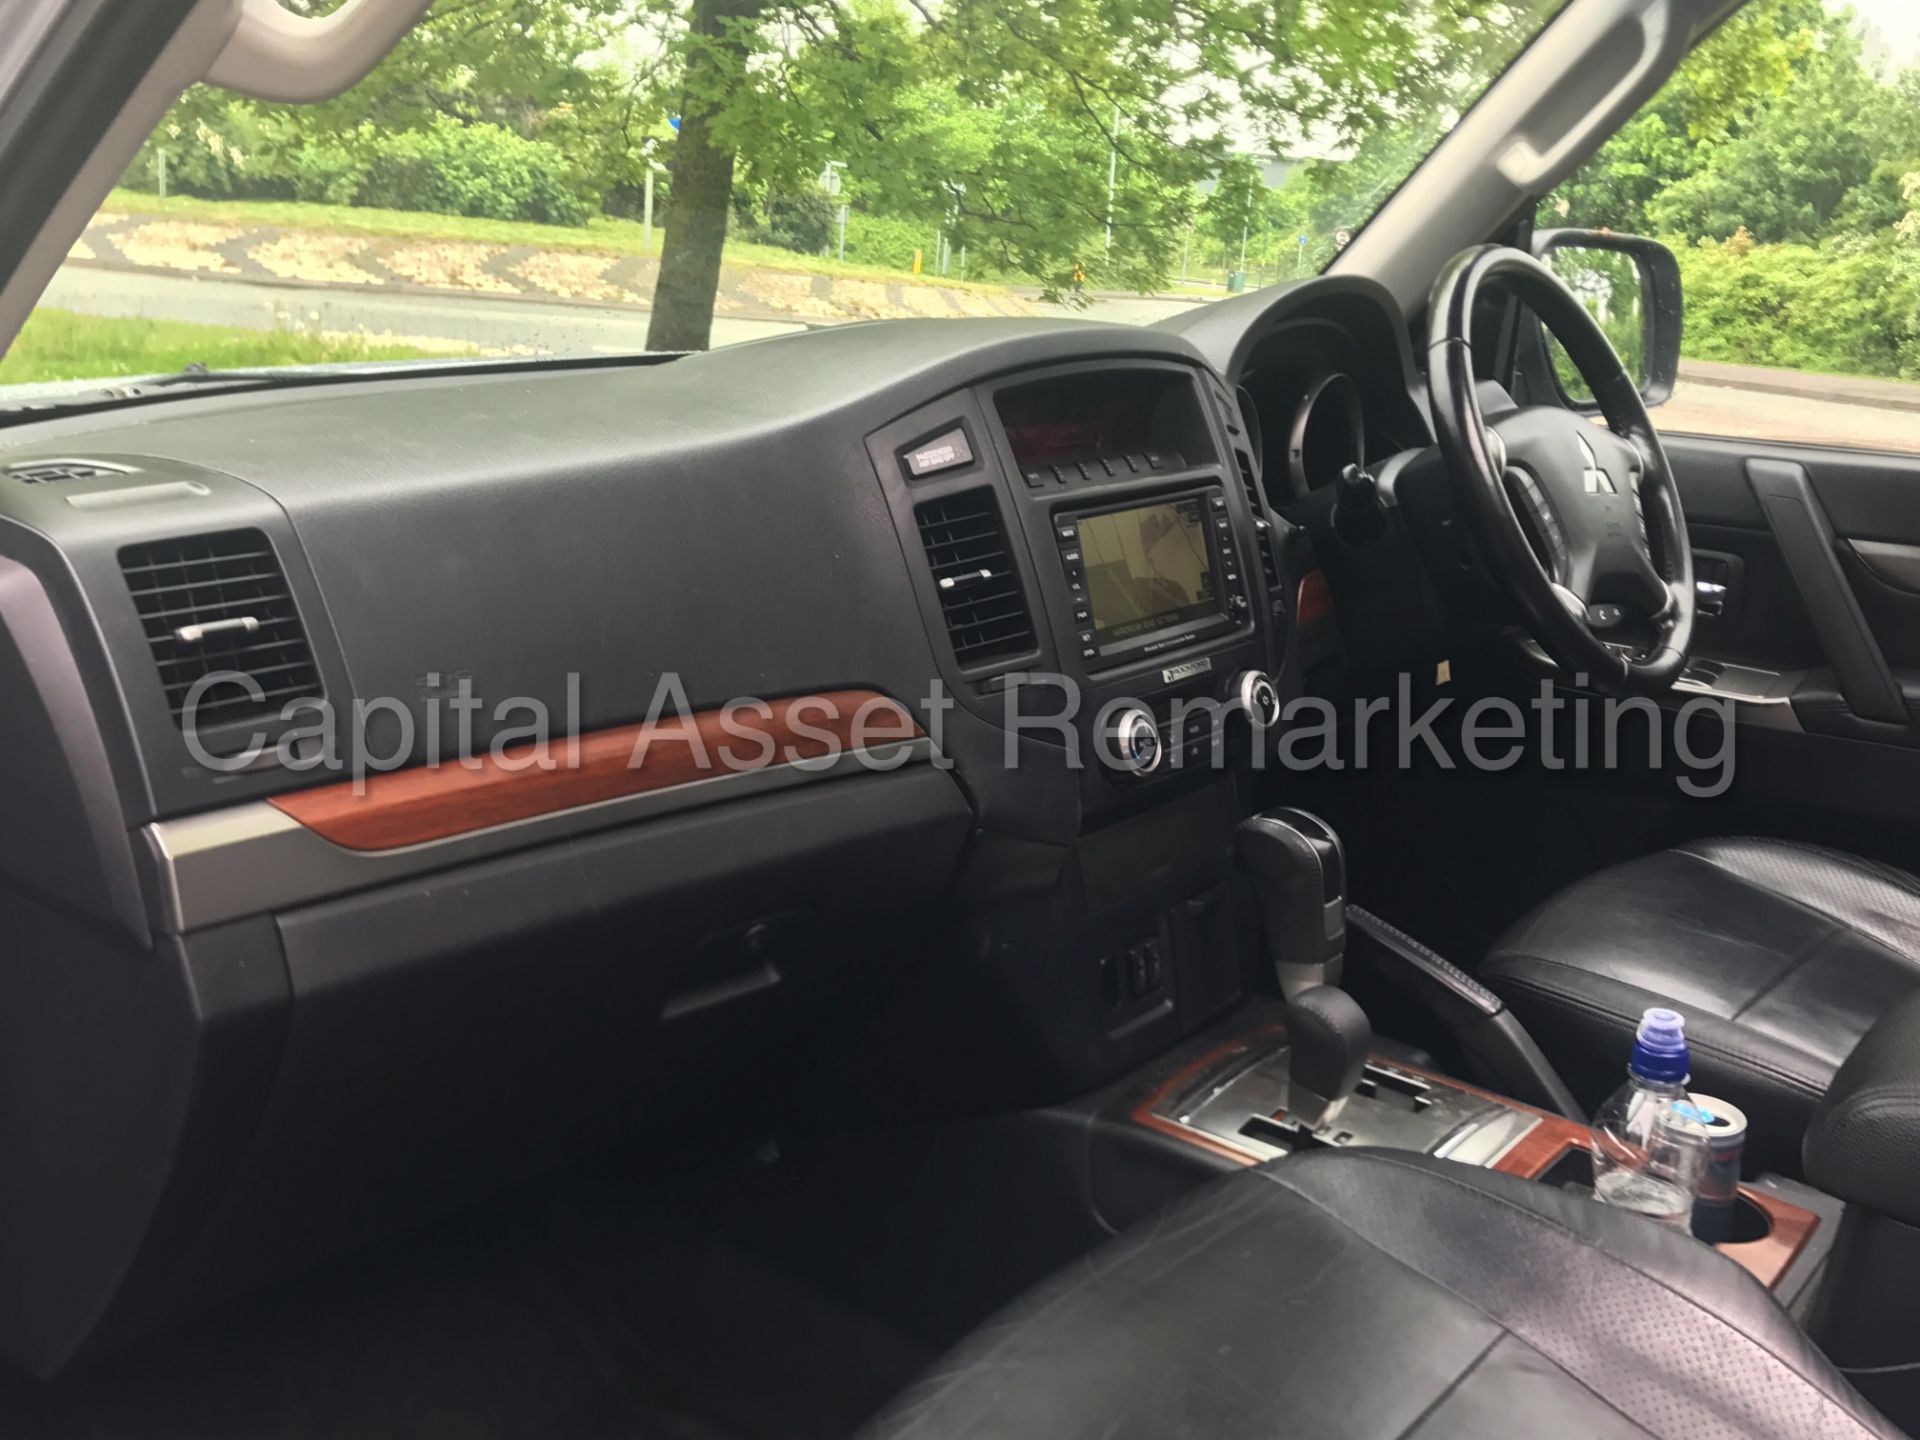 MITSUBISHI SHOGUN 'LWB - 7 SEATER' (2013) '3.2 DI-D - AUTO - LEATHER - SAT NAV' (1 OWNER FROM NEW) - Image 22 of 30